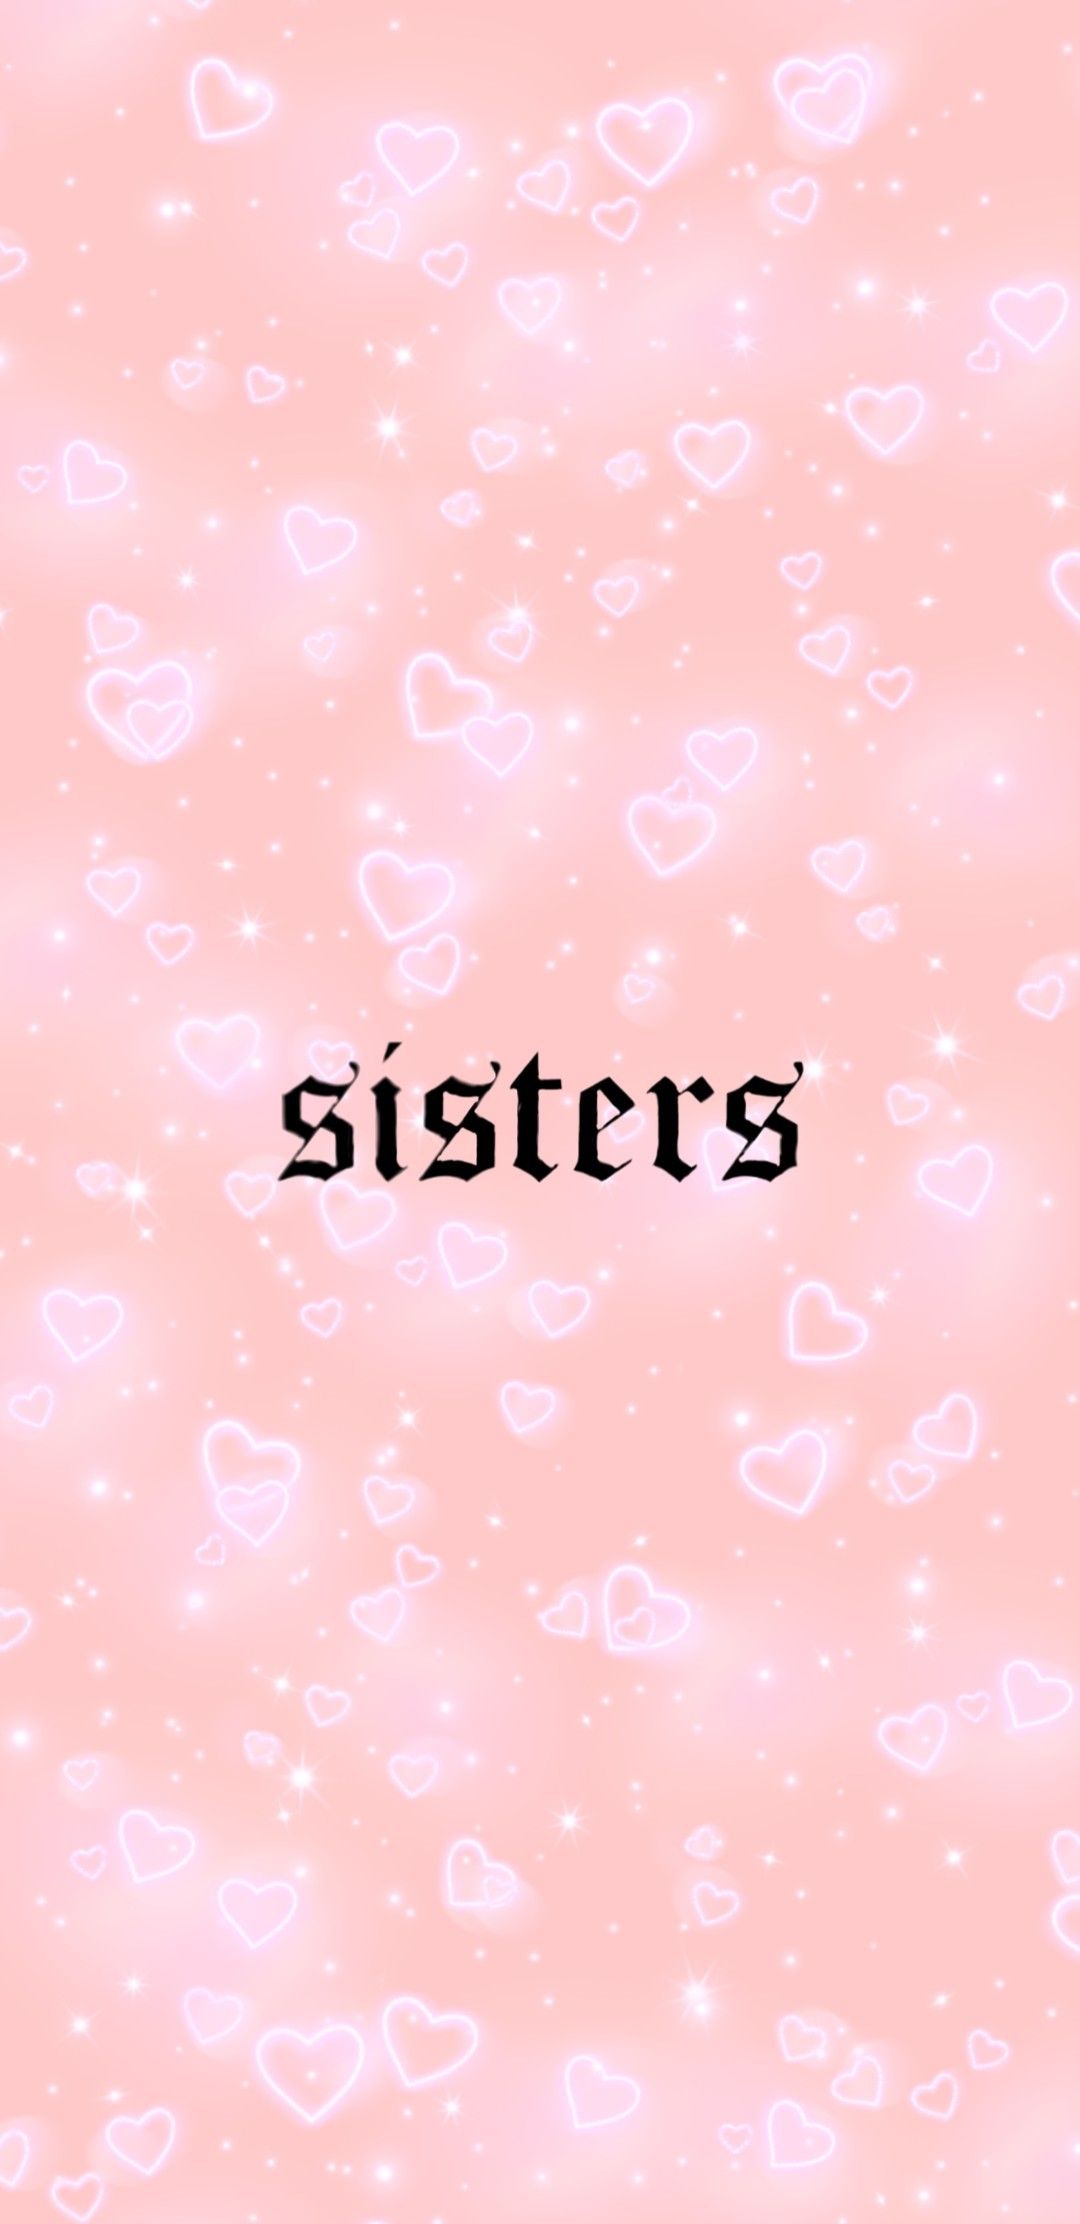 Best Sisters Wallpapers Wallpaper Cave 6050